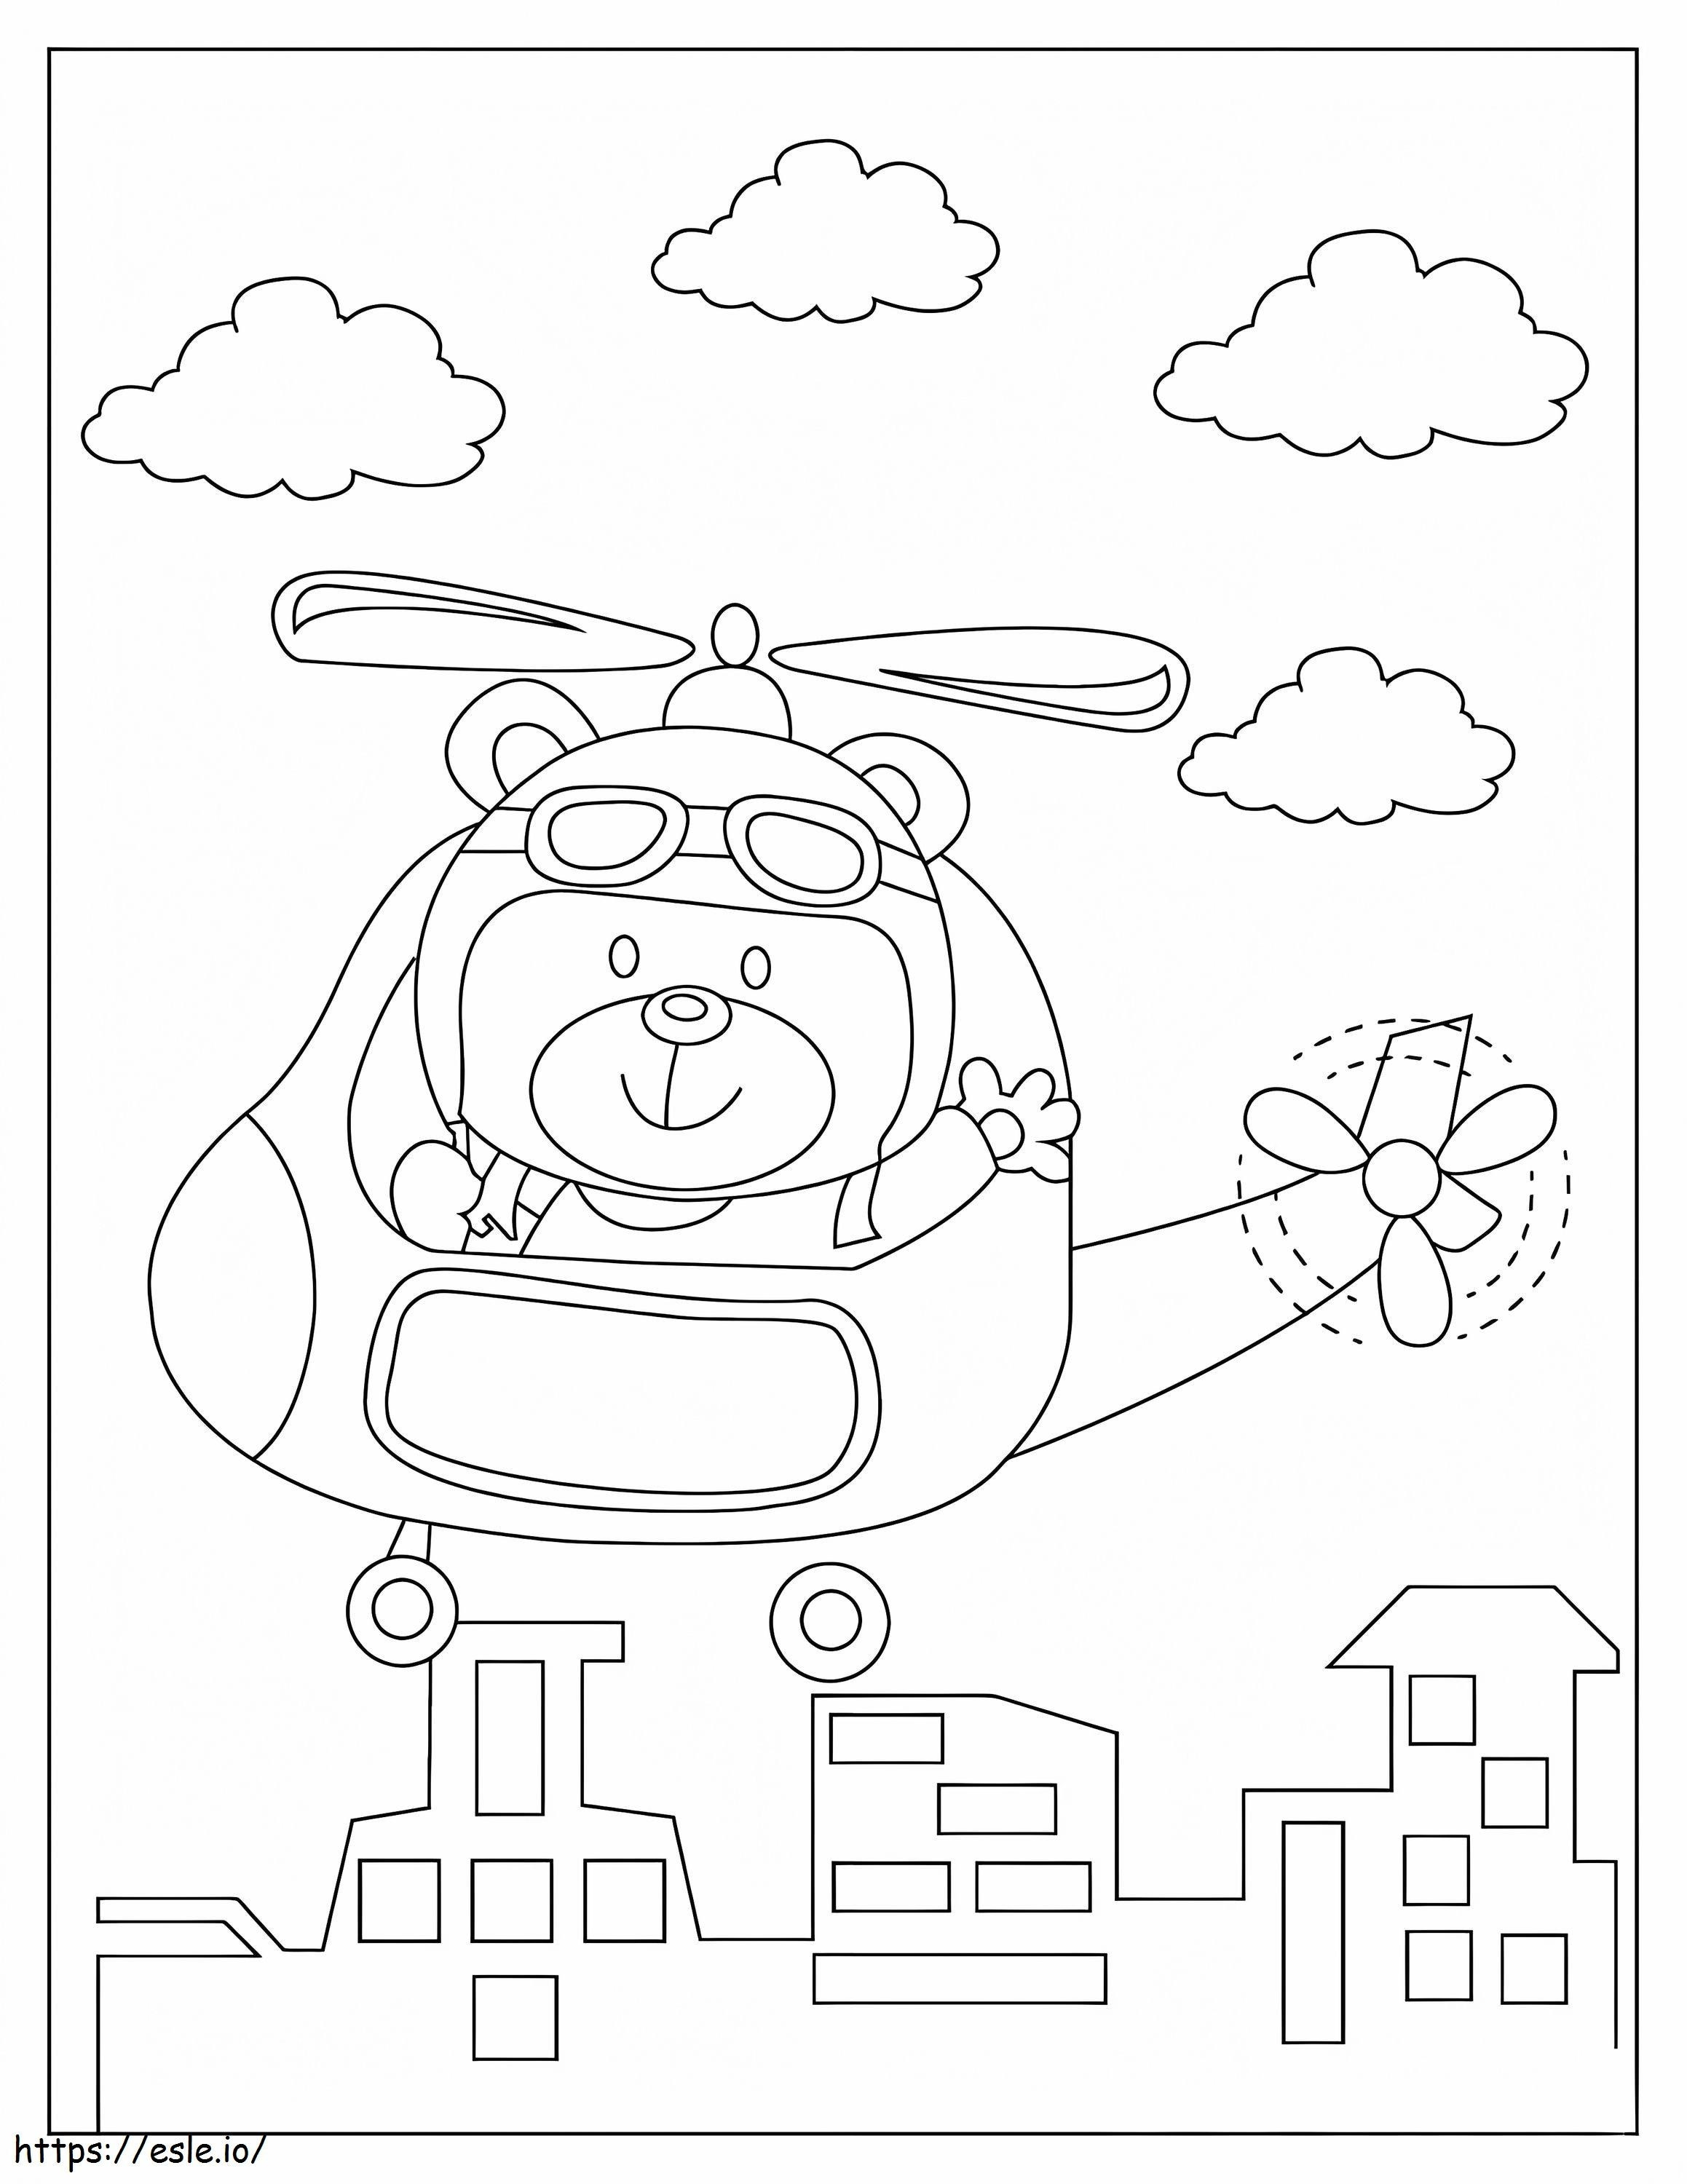 Bear In Helicopter coloring page